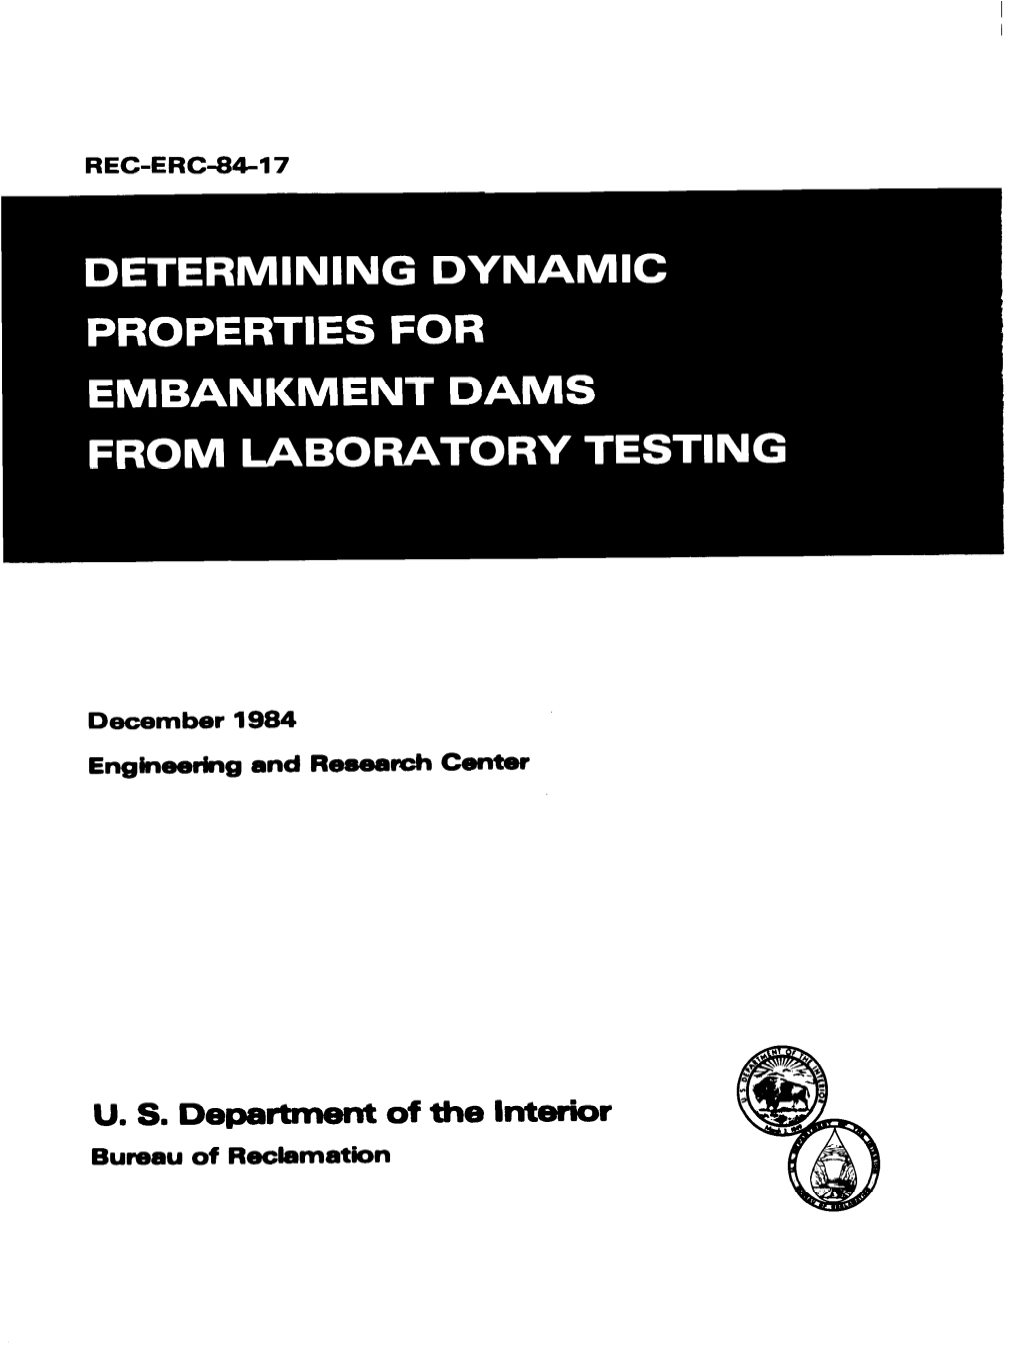 Determining Dynamic Properties for Embankment Dams from Laboratory Testing